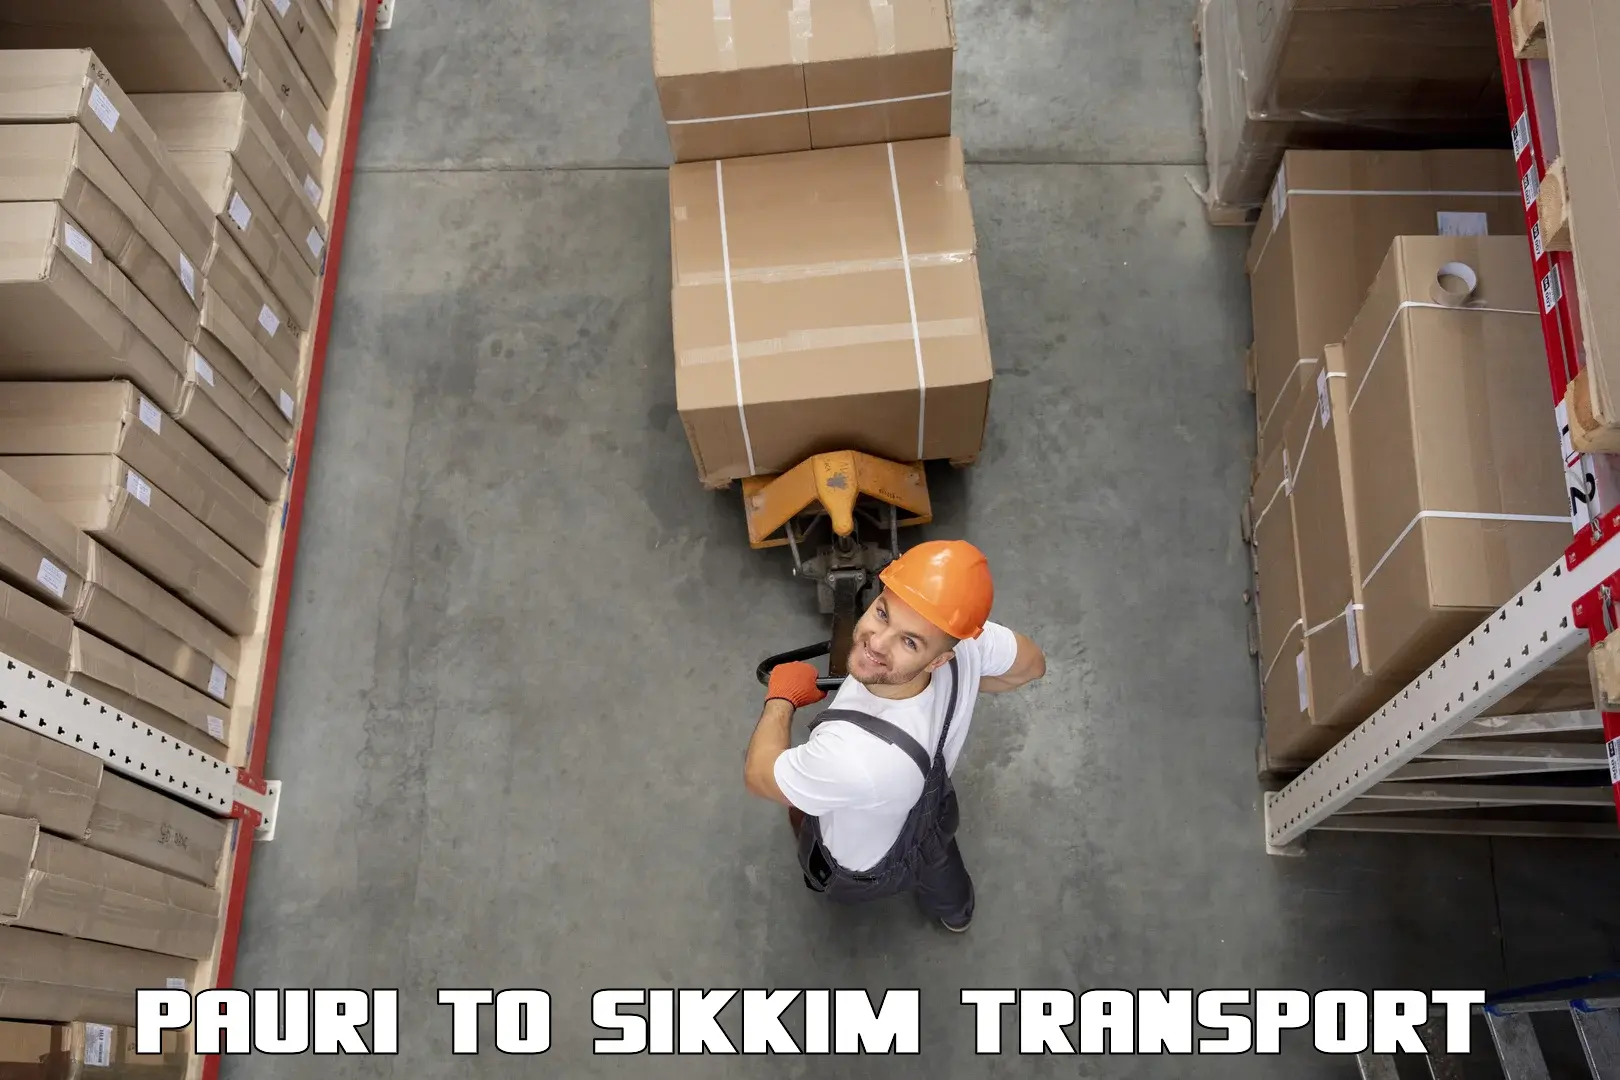 Online transport service Pauri to East Sikkim